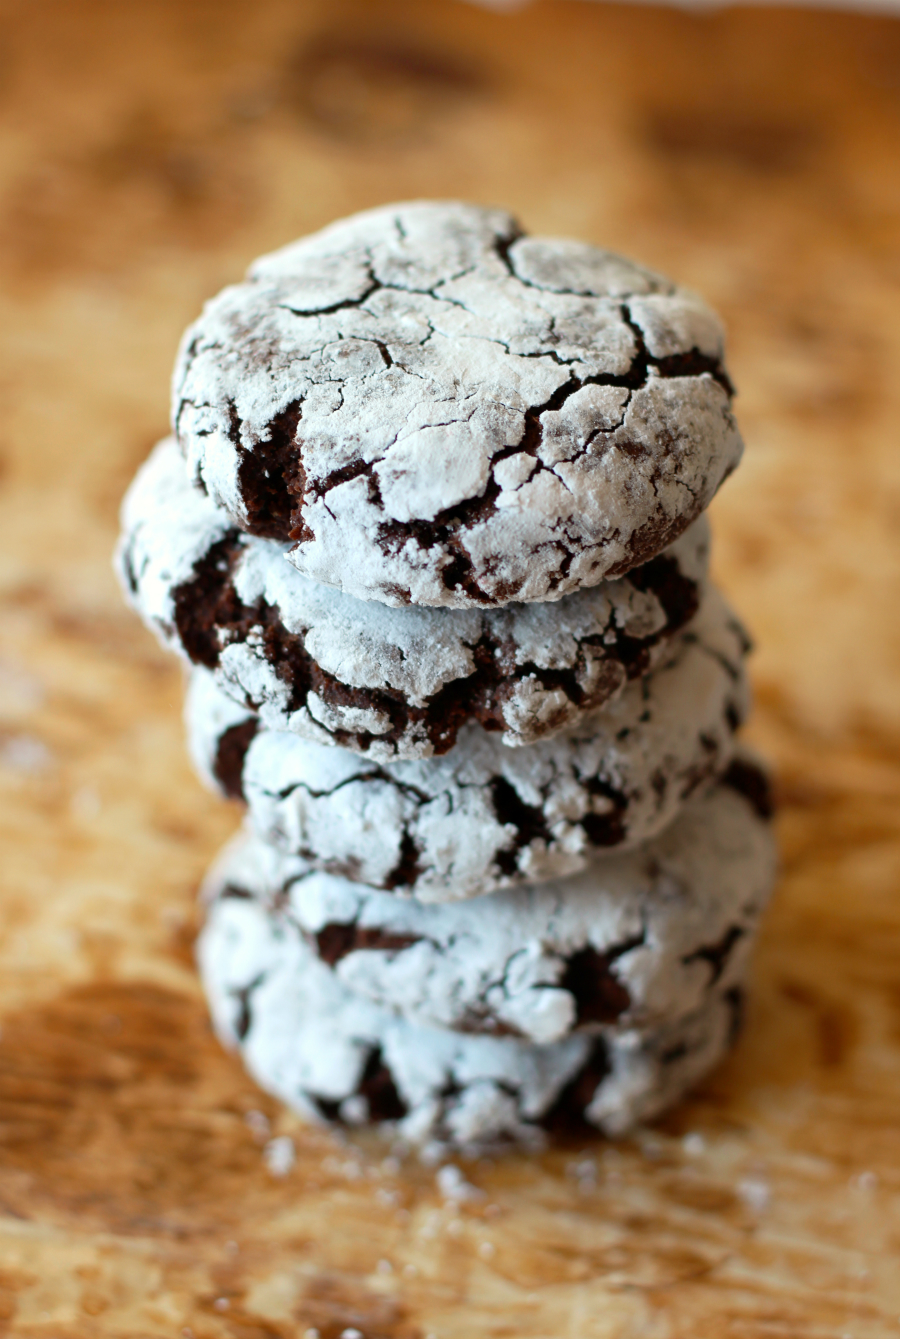 Chocolate Peppermint Crinkle Cookies | Strength and Sunshine @RebeccaGF666 A minty twist on the holiday crinkle cookie! Christmas won't be the same with these Chocolate Peppermint Crinkle Cookies! Gluten-free, vegan, and allergy-free, a perfect dessert recipe for kids, adults, and Santa too!